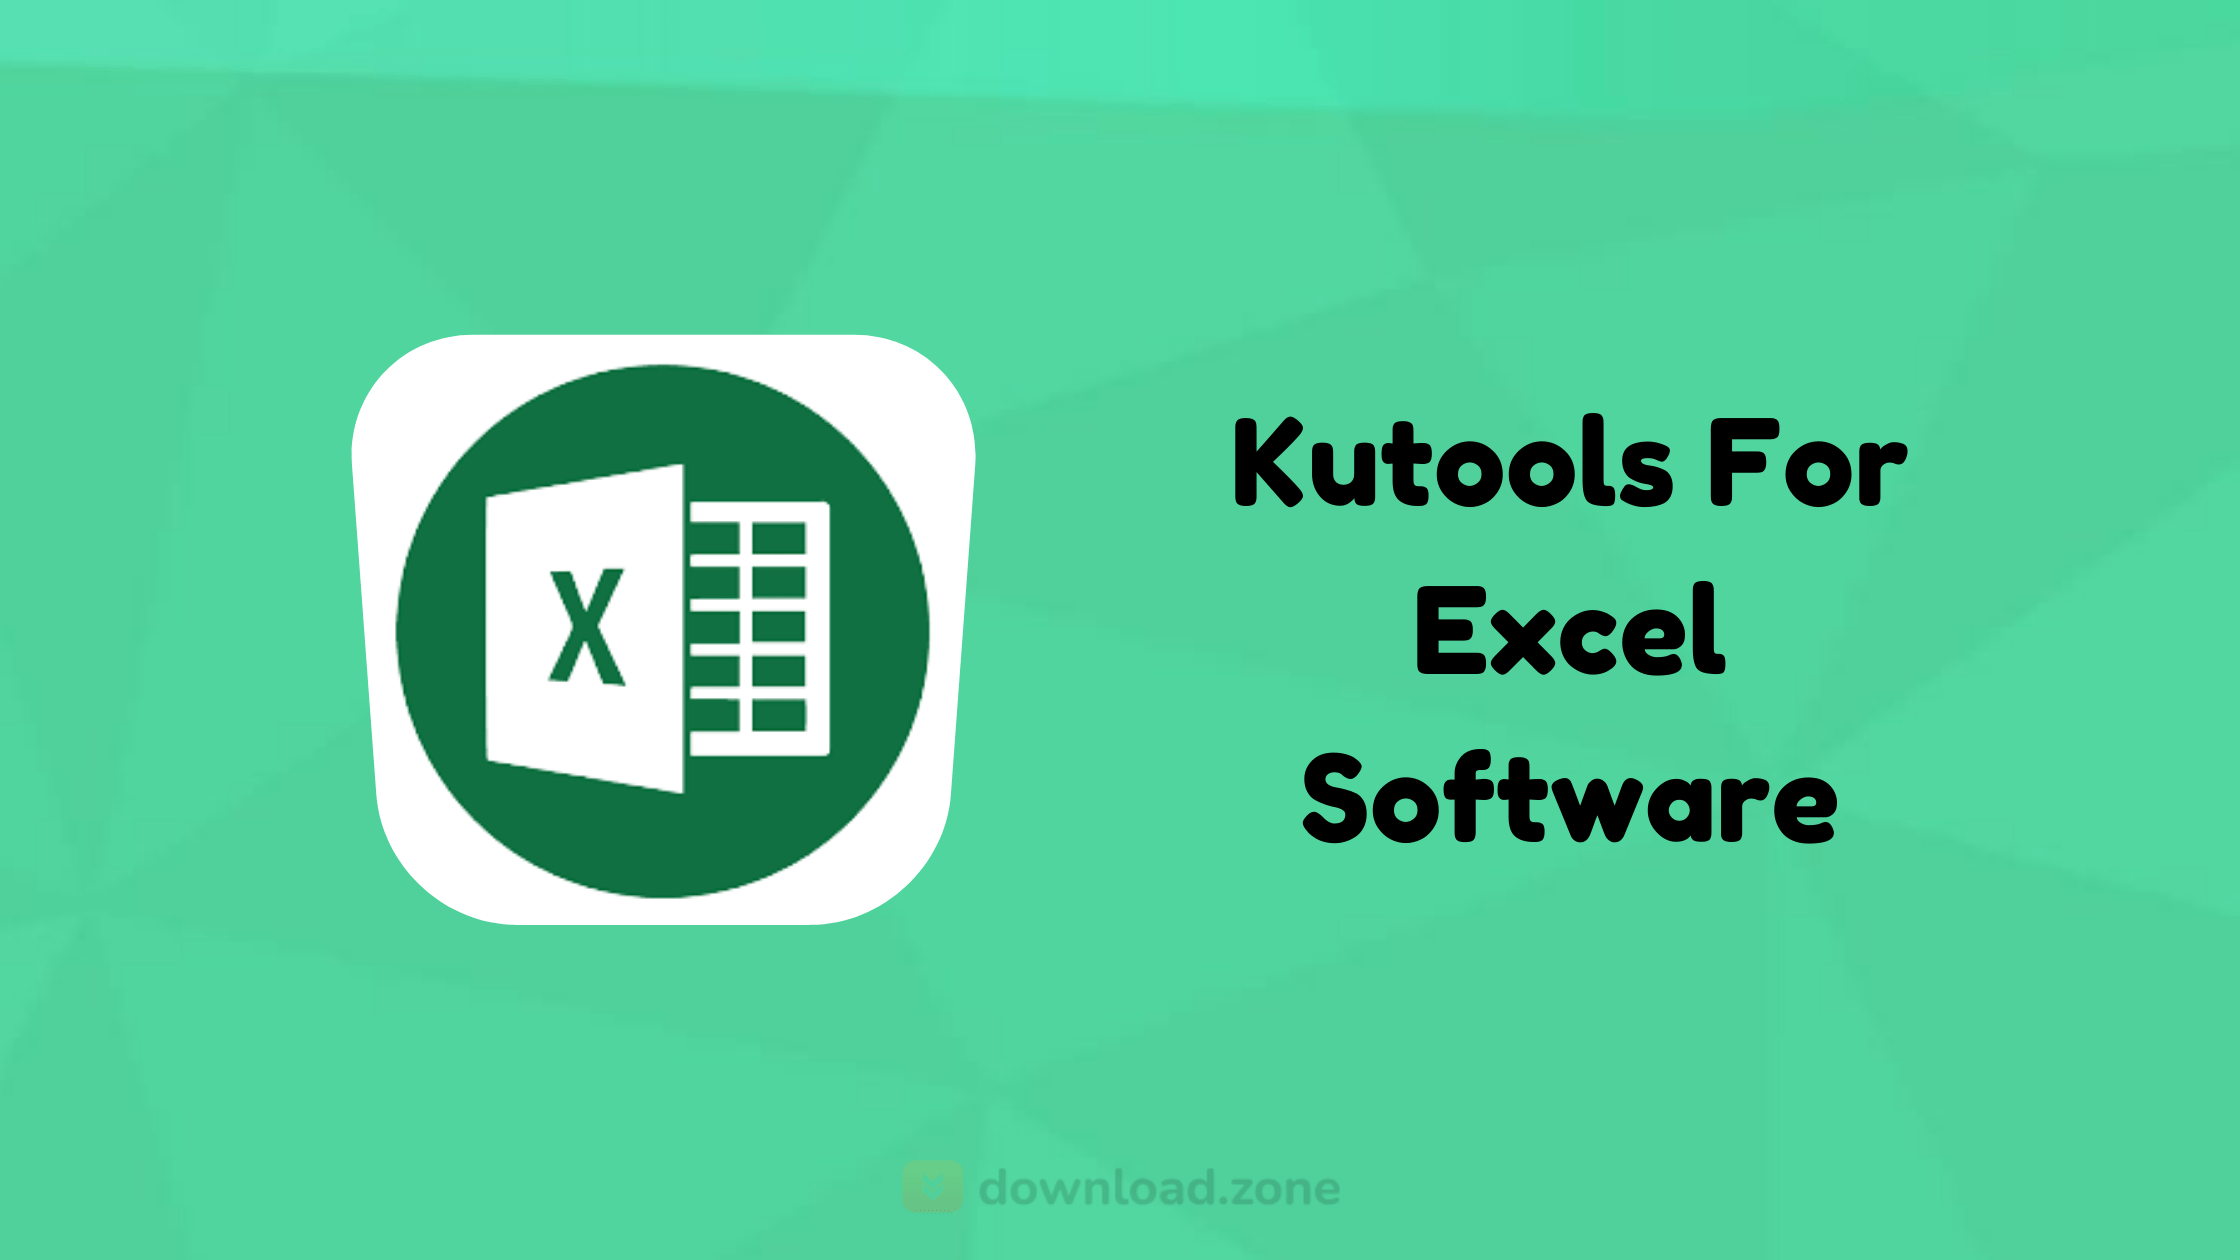 Download Kutools For Excel Software To Manage All Your Workbook